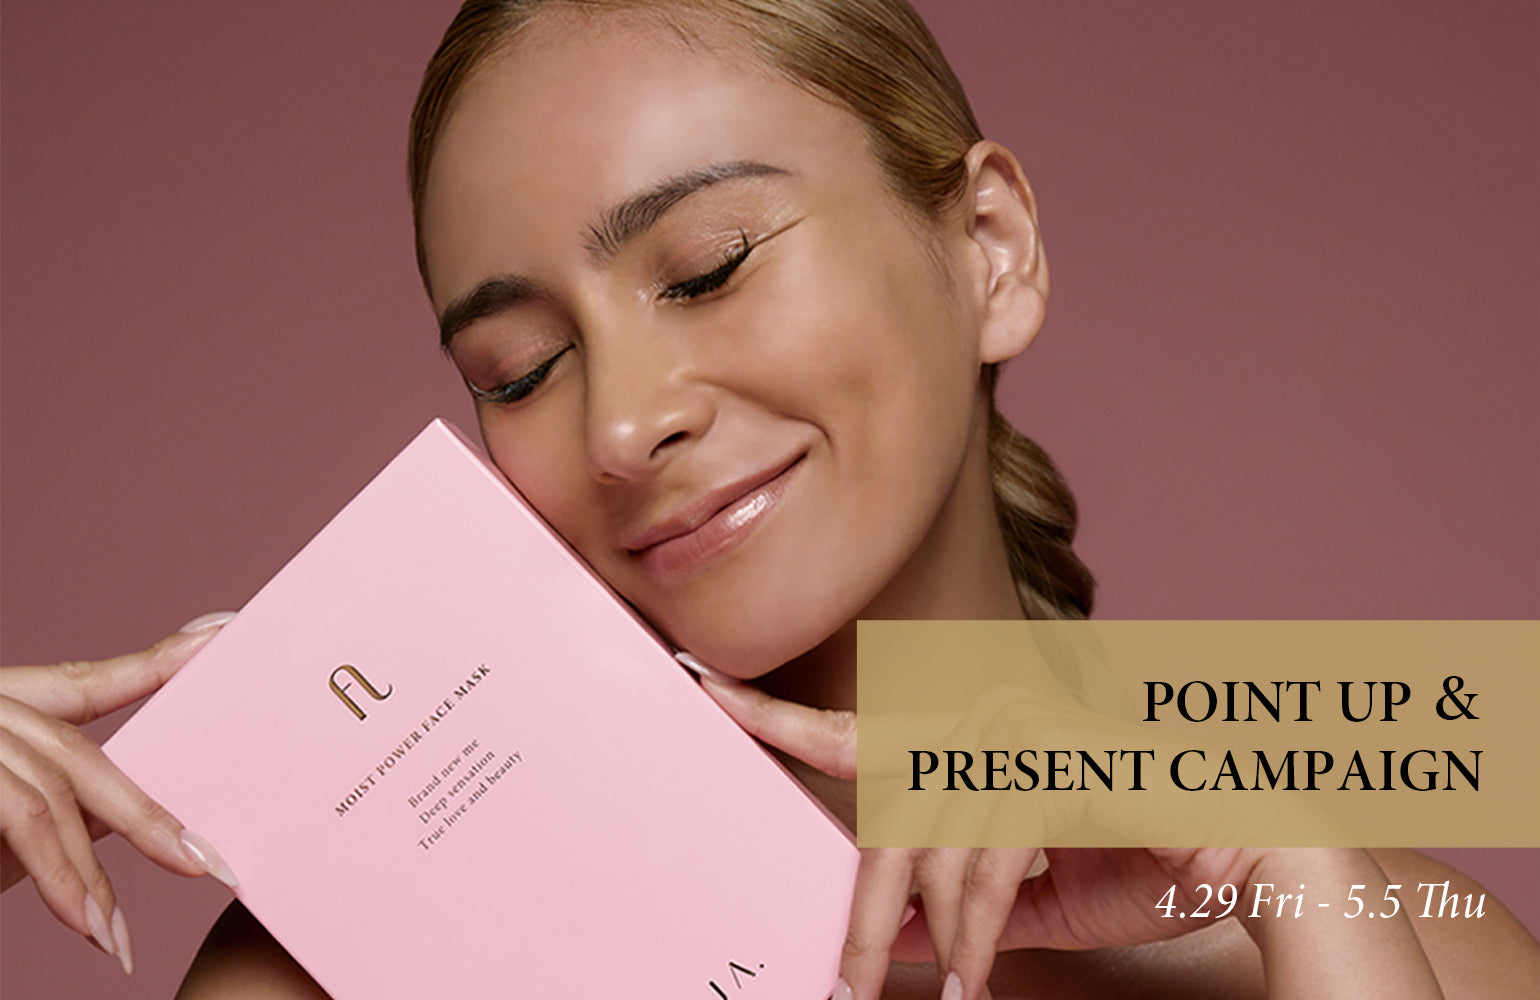 POINT UP ＆ PRESENT CAMPAIGN